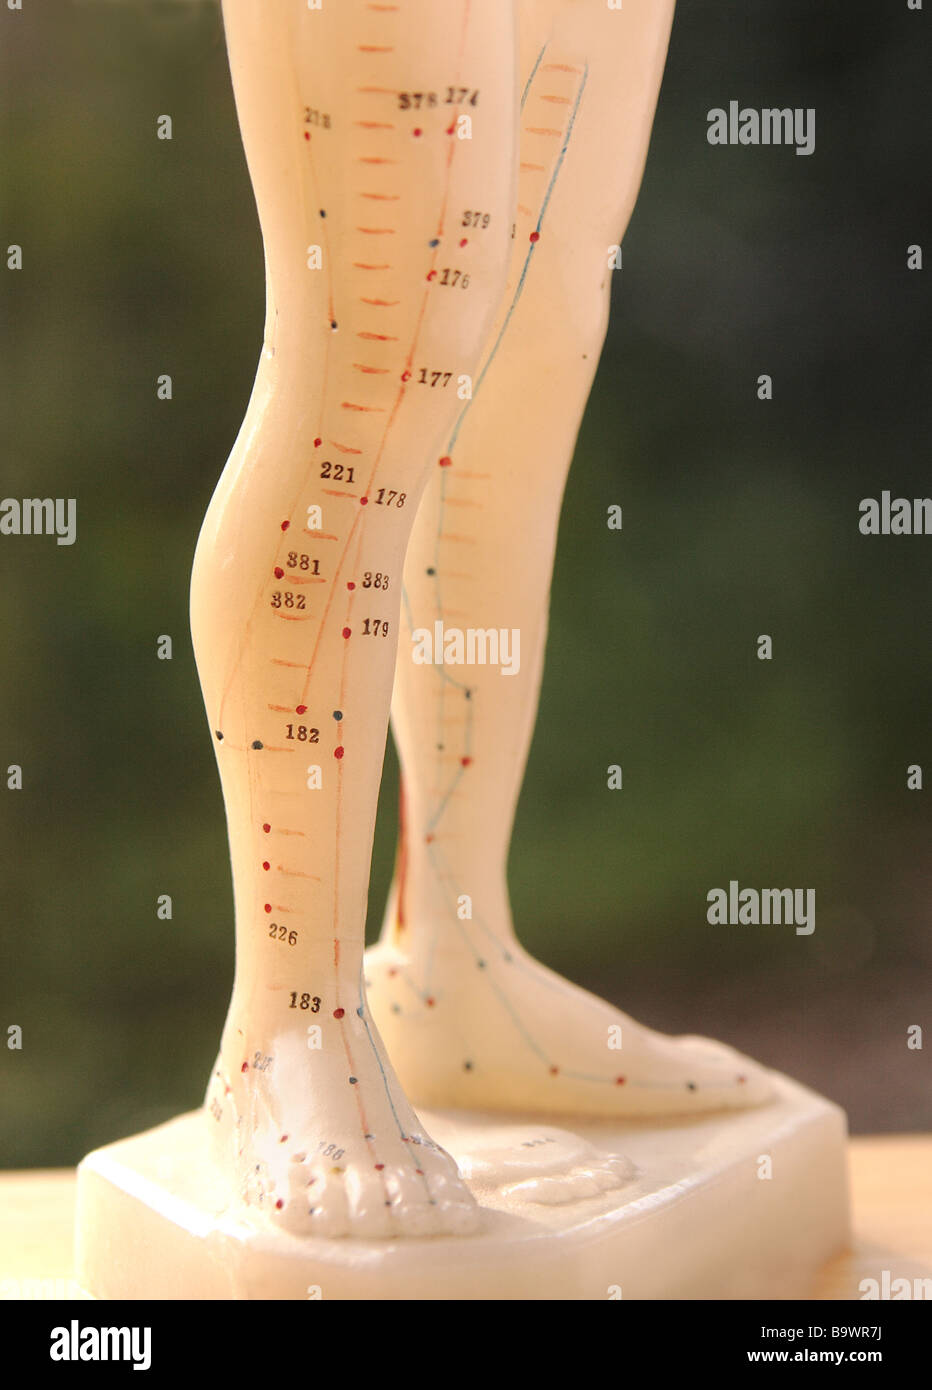 close-up view of an acupuncture figure's legs Stock Photo - Alamy